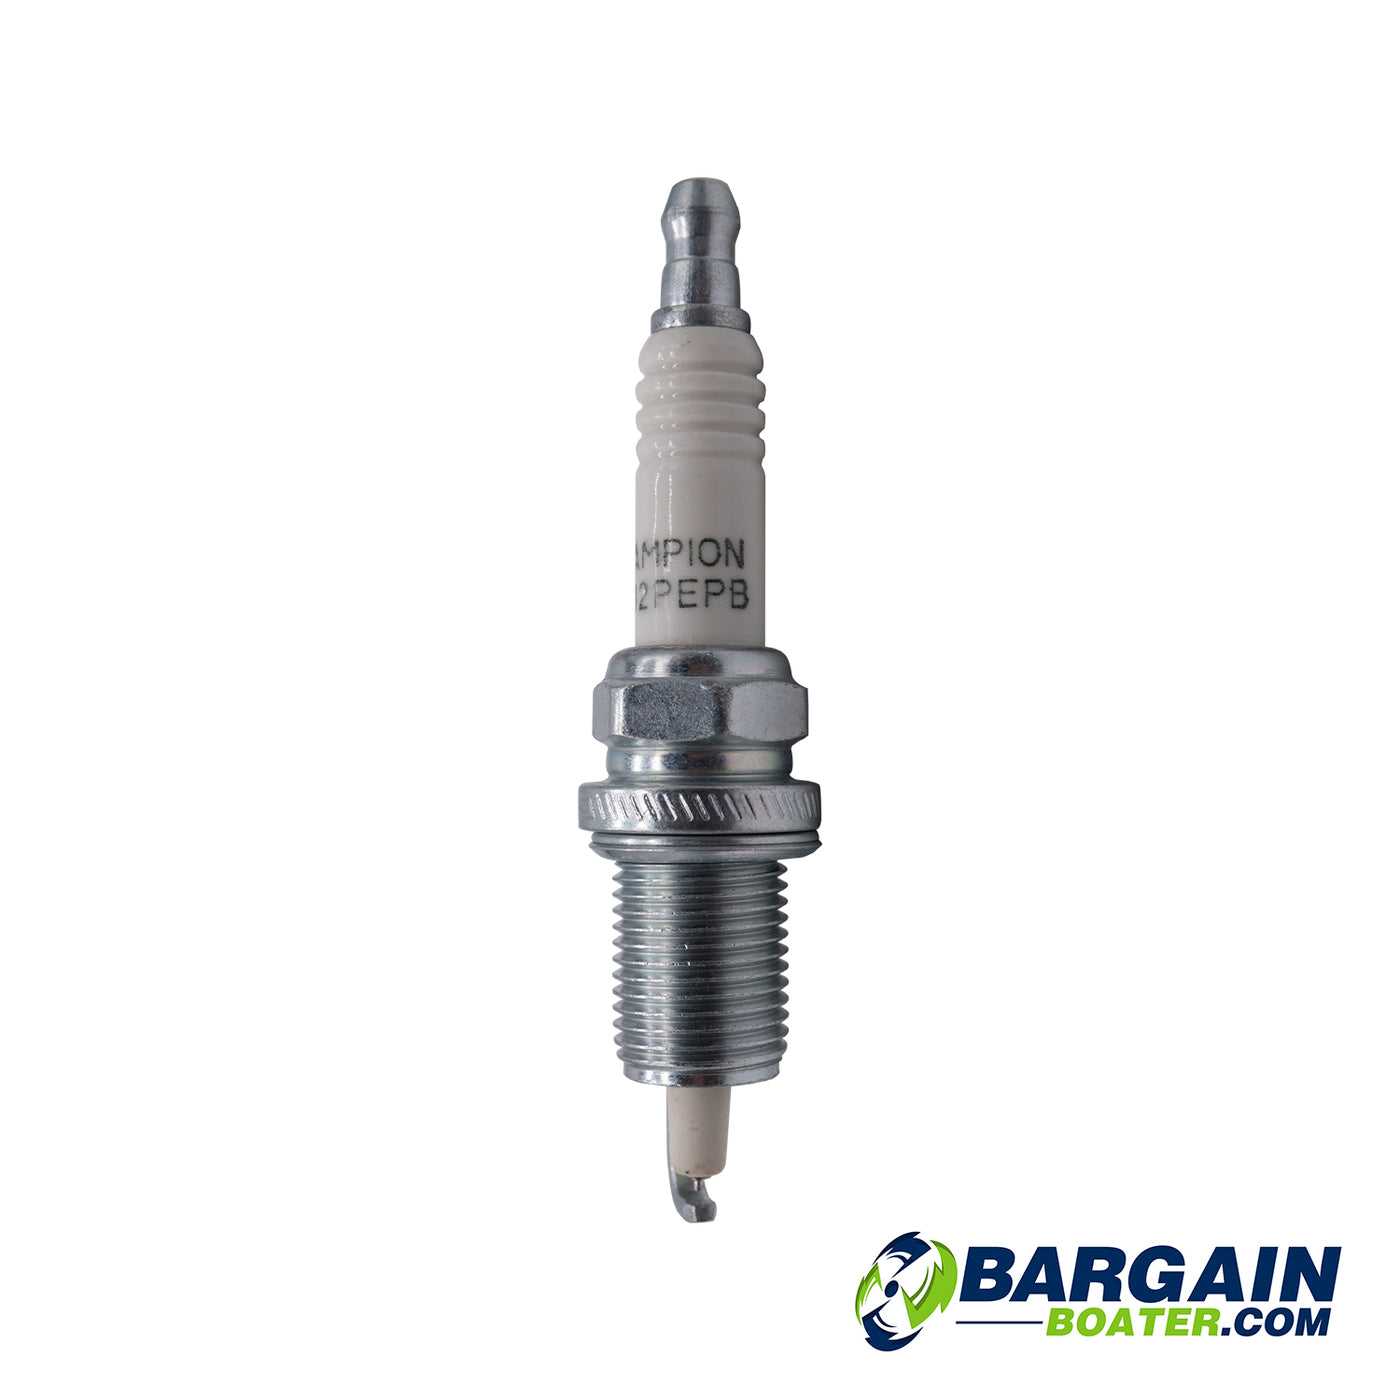 This is an Evinrude/Johnson, Champion (QC12PEPB), E-TEC 2-Stroke Spark Plug (5006525) for outboard motors.